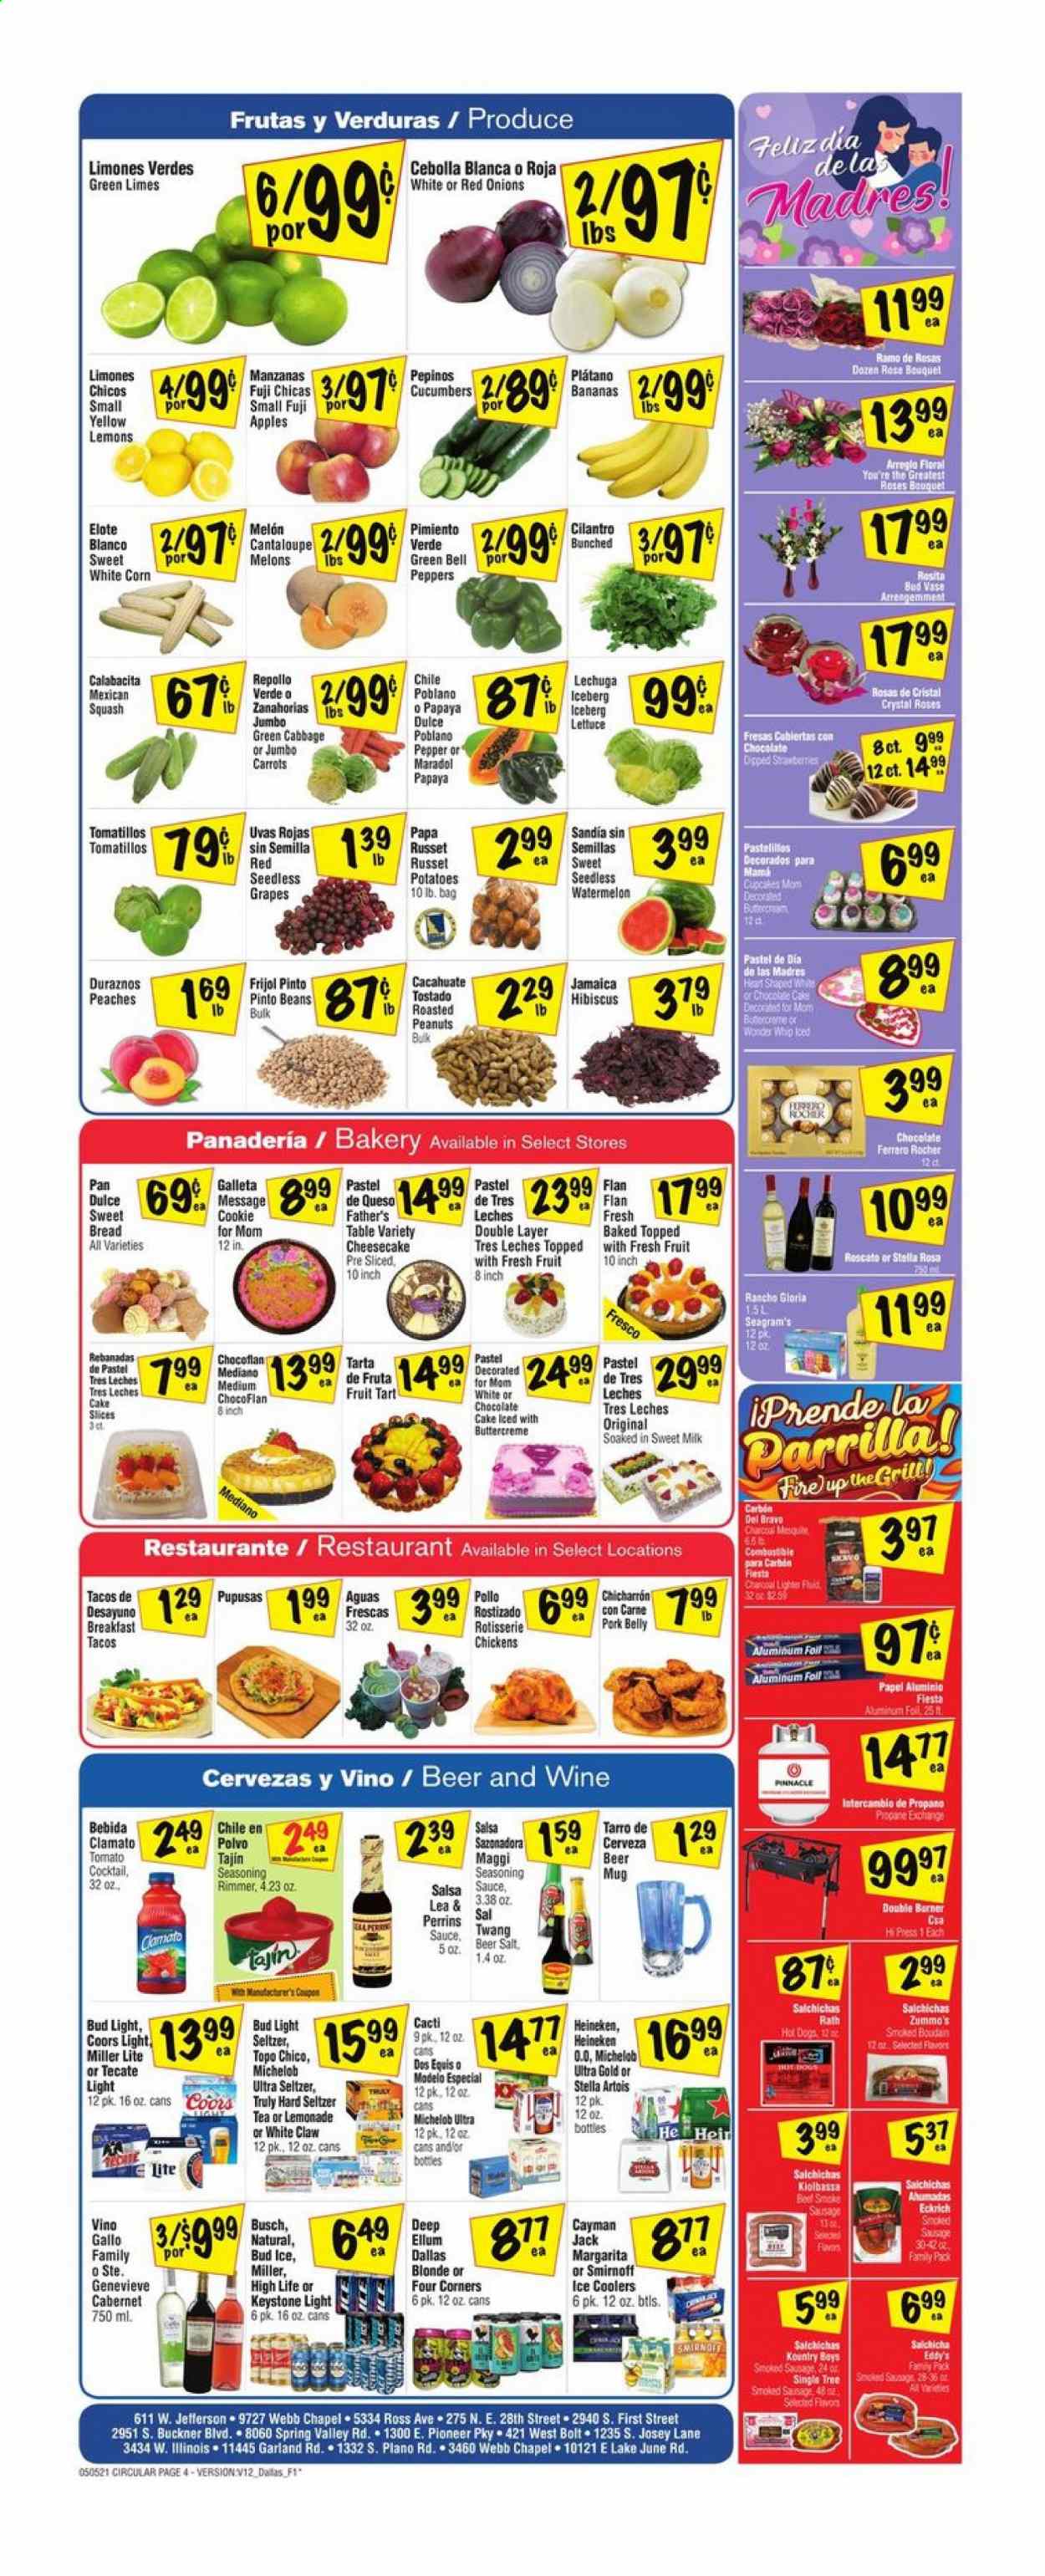 thumbnail - Fiesta Mart Flyer - 05/05/2021 - 05/11/2021 - Sales products - Miller Lite, Stella Artois, Coors, Dos Equis, Michelob, seedless grapes, bread, cake, tart, tacos, Father's Table, cupcake, cheesecake, sweet bread, fruit tart, chocolate cake, beans, cantaloupe, carrots, corn, cucumber, red onions, russet potatoes, tomatillo, potatoes, lettuce, mexican squash, apples, bananas, grapes, limes, watermelon, papaya, sausage, smoked sausage, milk, chocolate, Ferrero Rocher, Maggi, pinto beans, cilantro, spice, salsa, lemonade, Clamato, tea, Cabernet Sauvignon, Gallo Family, rosé wine, Smirnoff, White Claw, Hard Seltzer, TRULY, beer, Busch, Bud Light, Heineken, Keystone, Modelo, pork belly, pork meat, aluminium foil, melons, lemons, peaches. Page 4.